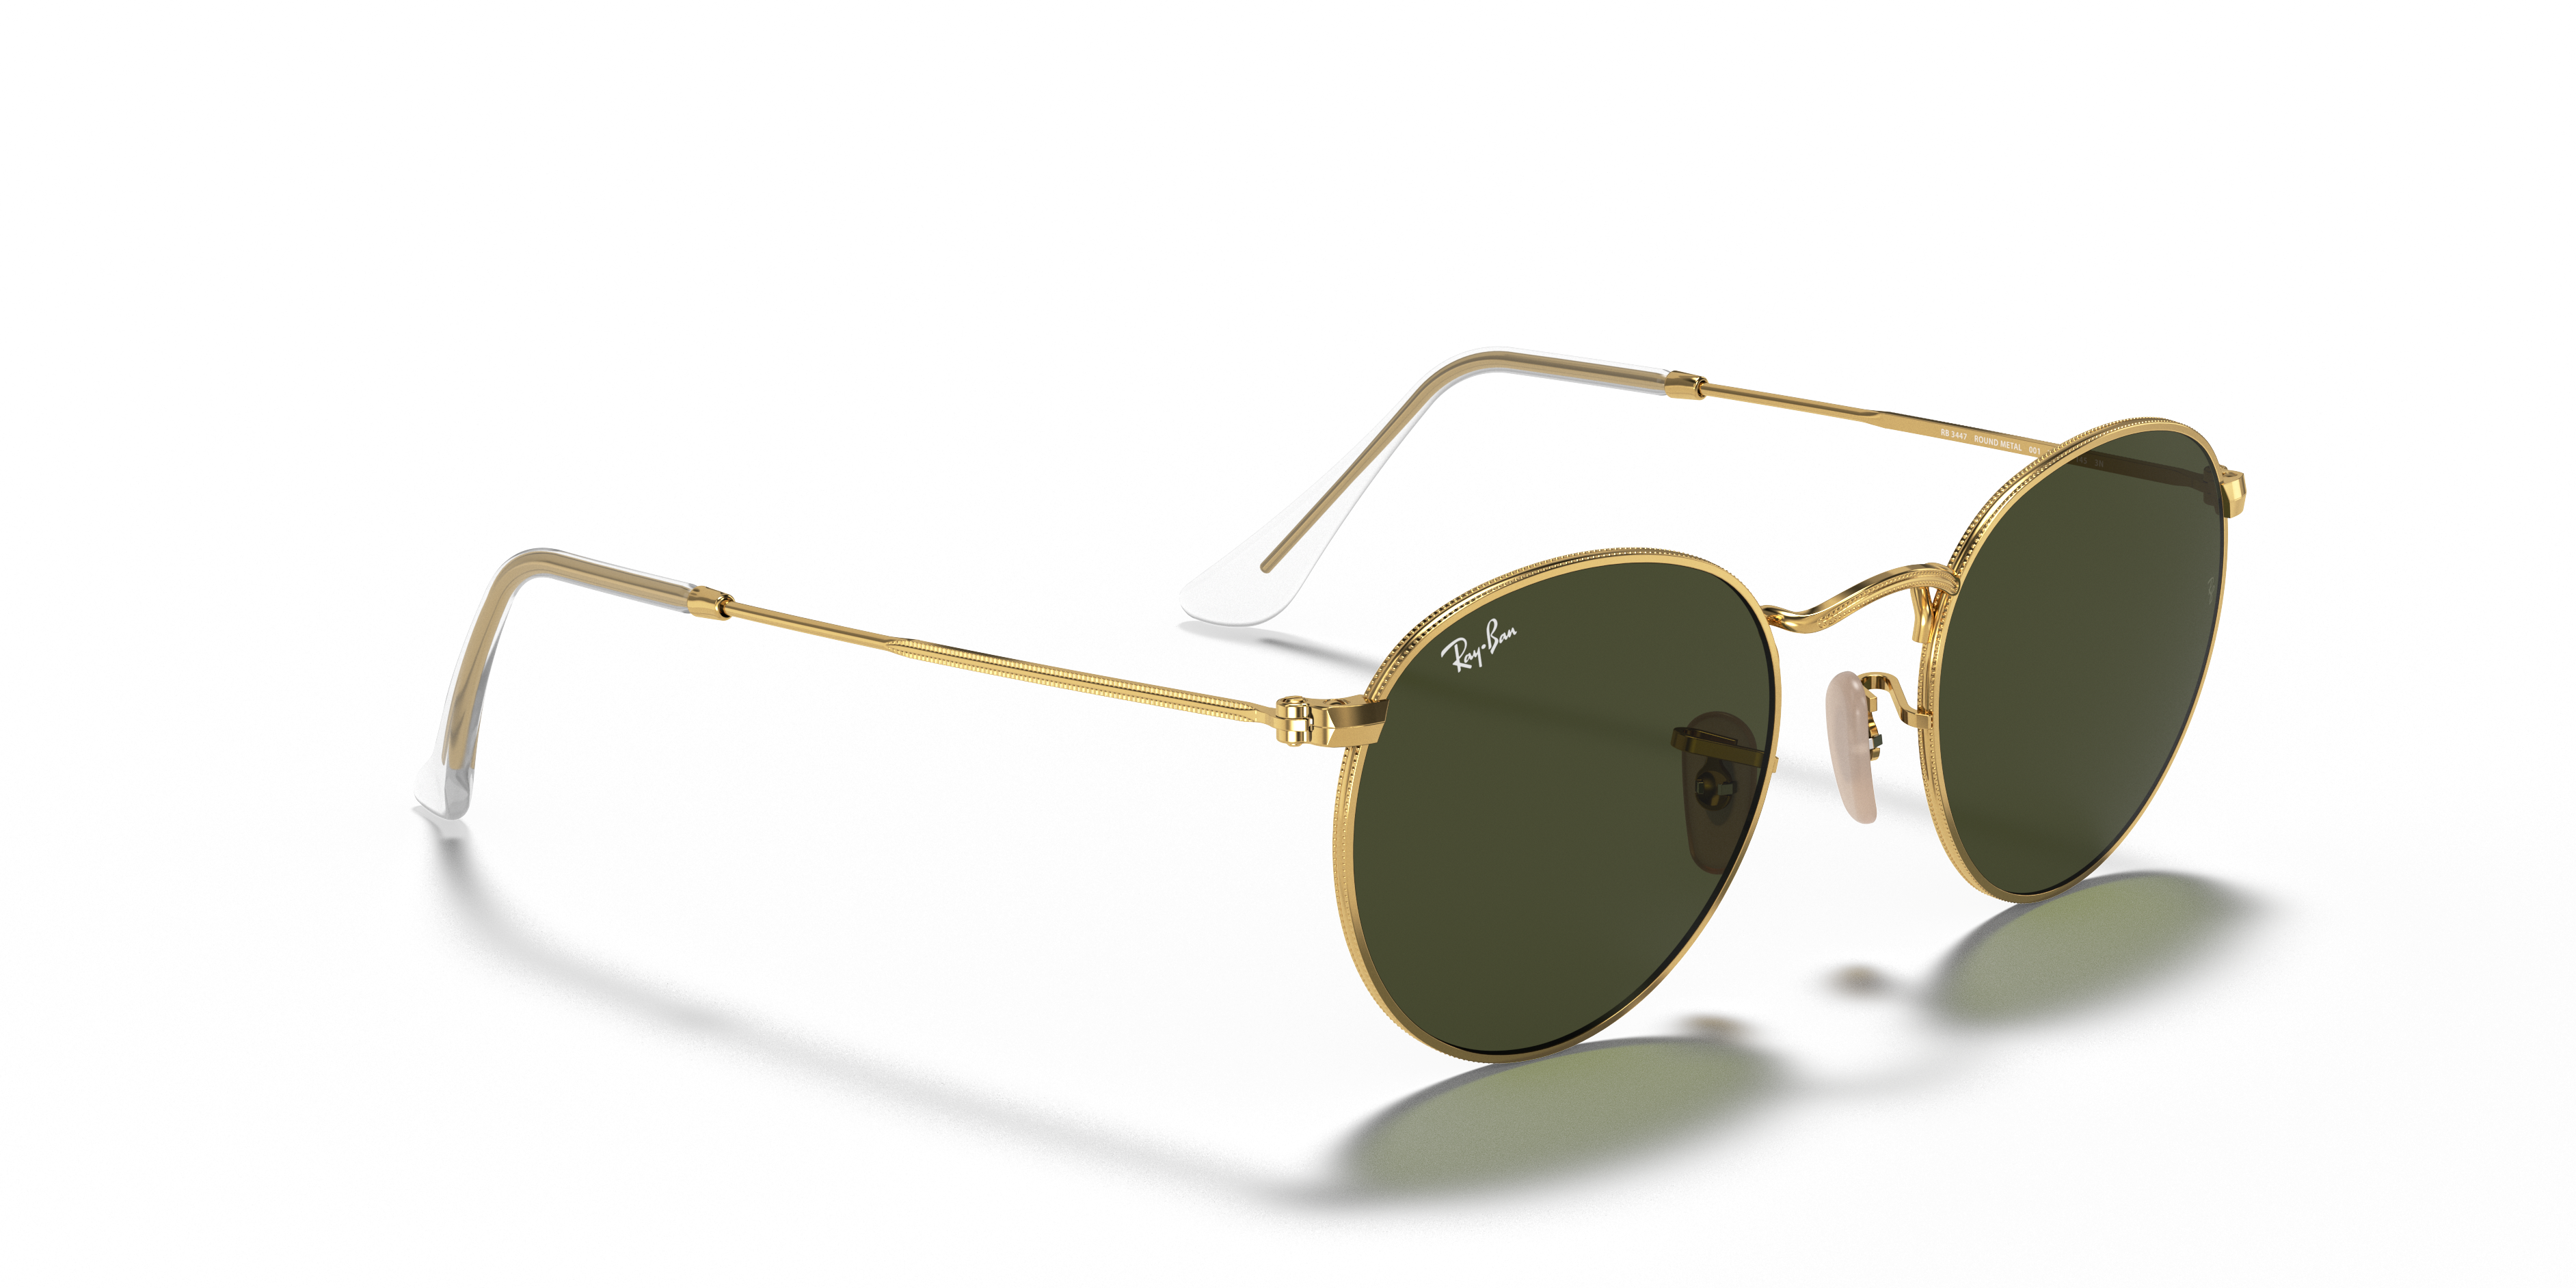 Ray Ban Ronde zonnebril goud-groen casual uitstraling Accessoires Zonnebrillen Ronde zonnebrillen